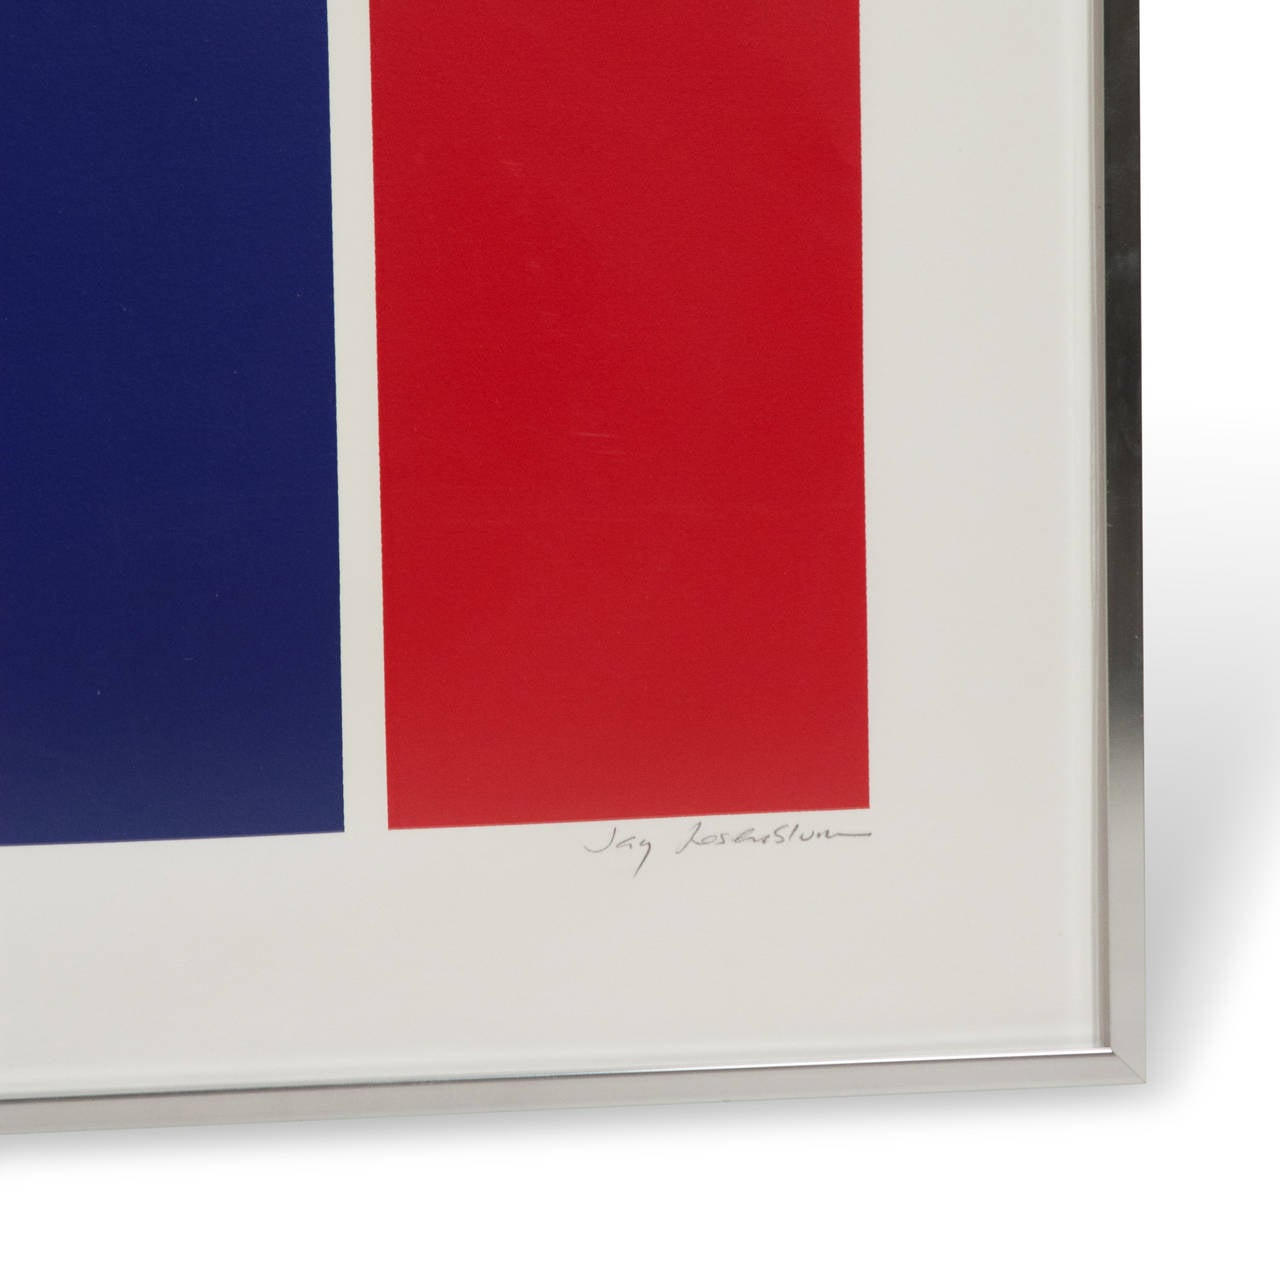 Abstract screen-print, four different vertical color blocks, in aluminum frame, by Jay Rosenblum (1933-1989), American, 1975. Numbered lower left in pencil 36/300, signed lower right in pencil. Framed 42 1/2 in x 24 1/2 in.